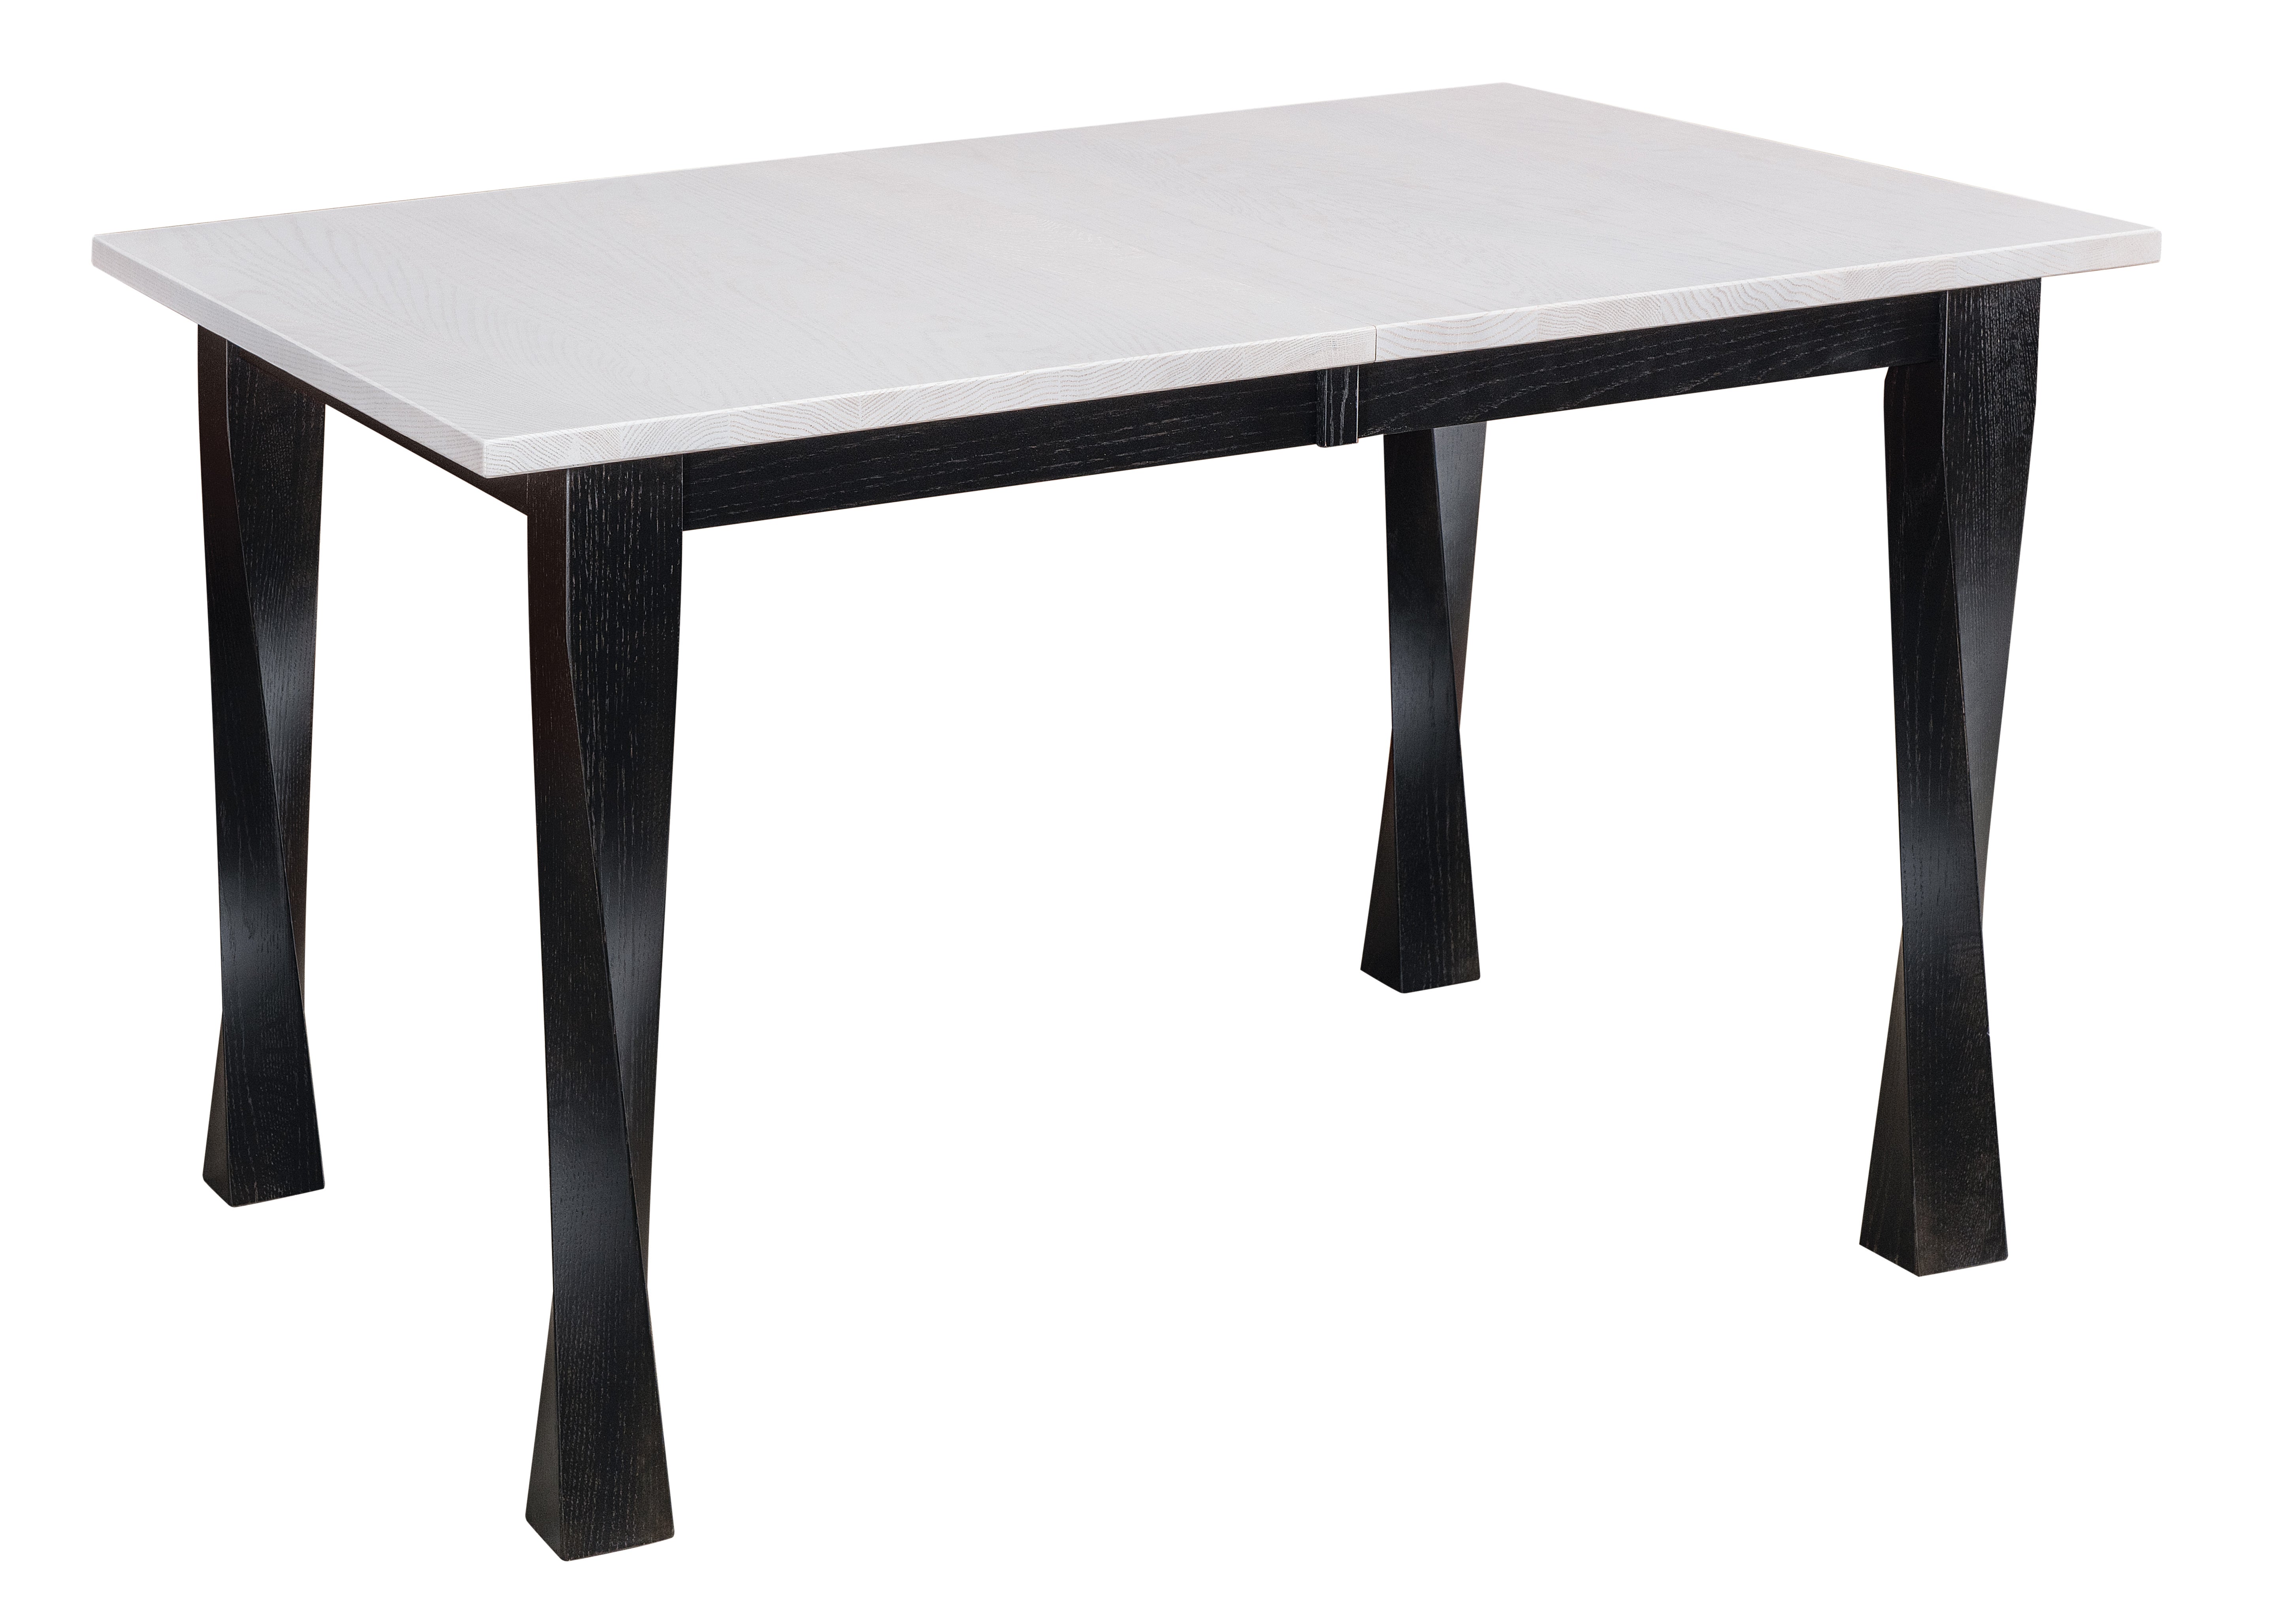 the lexington twist leg mini table shown in red oak with a muted white 10 sheen top and a muted black 10 sheen base